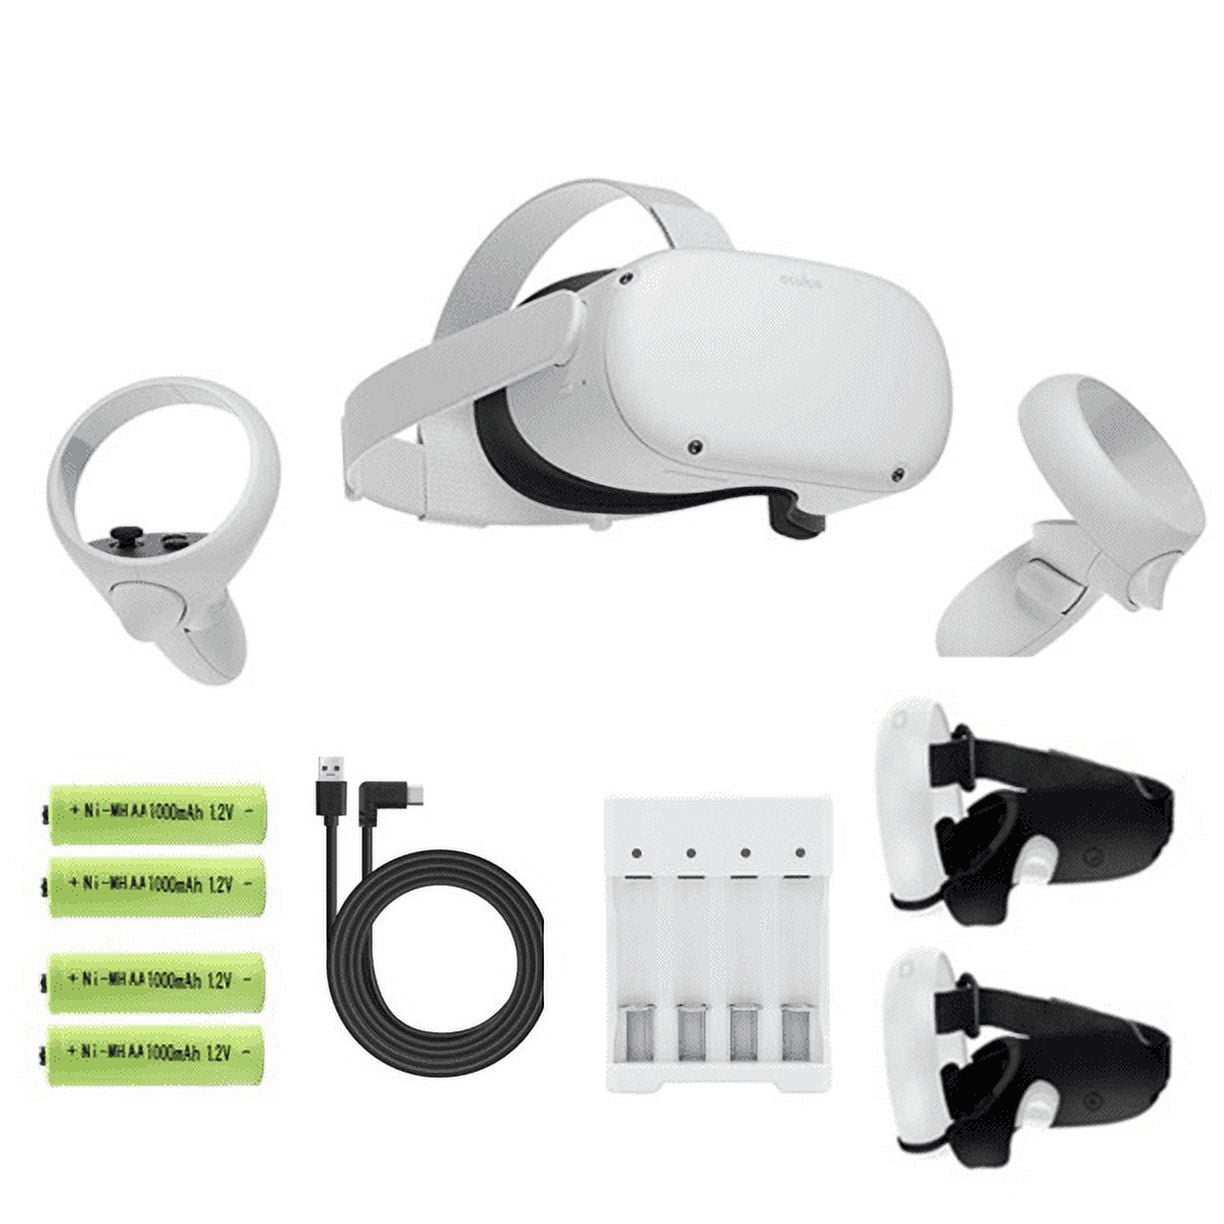 Meta Quest 2 VR Headset All-In-One Set Fully wireless 256 GB game system  Oculus